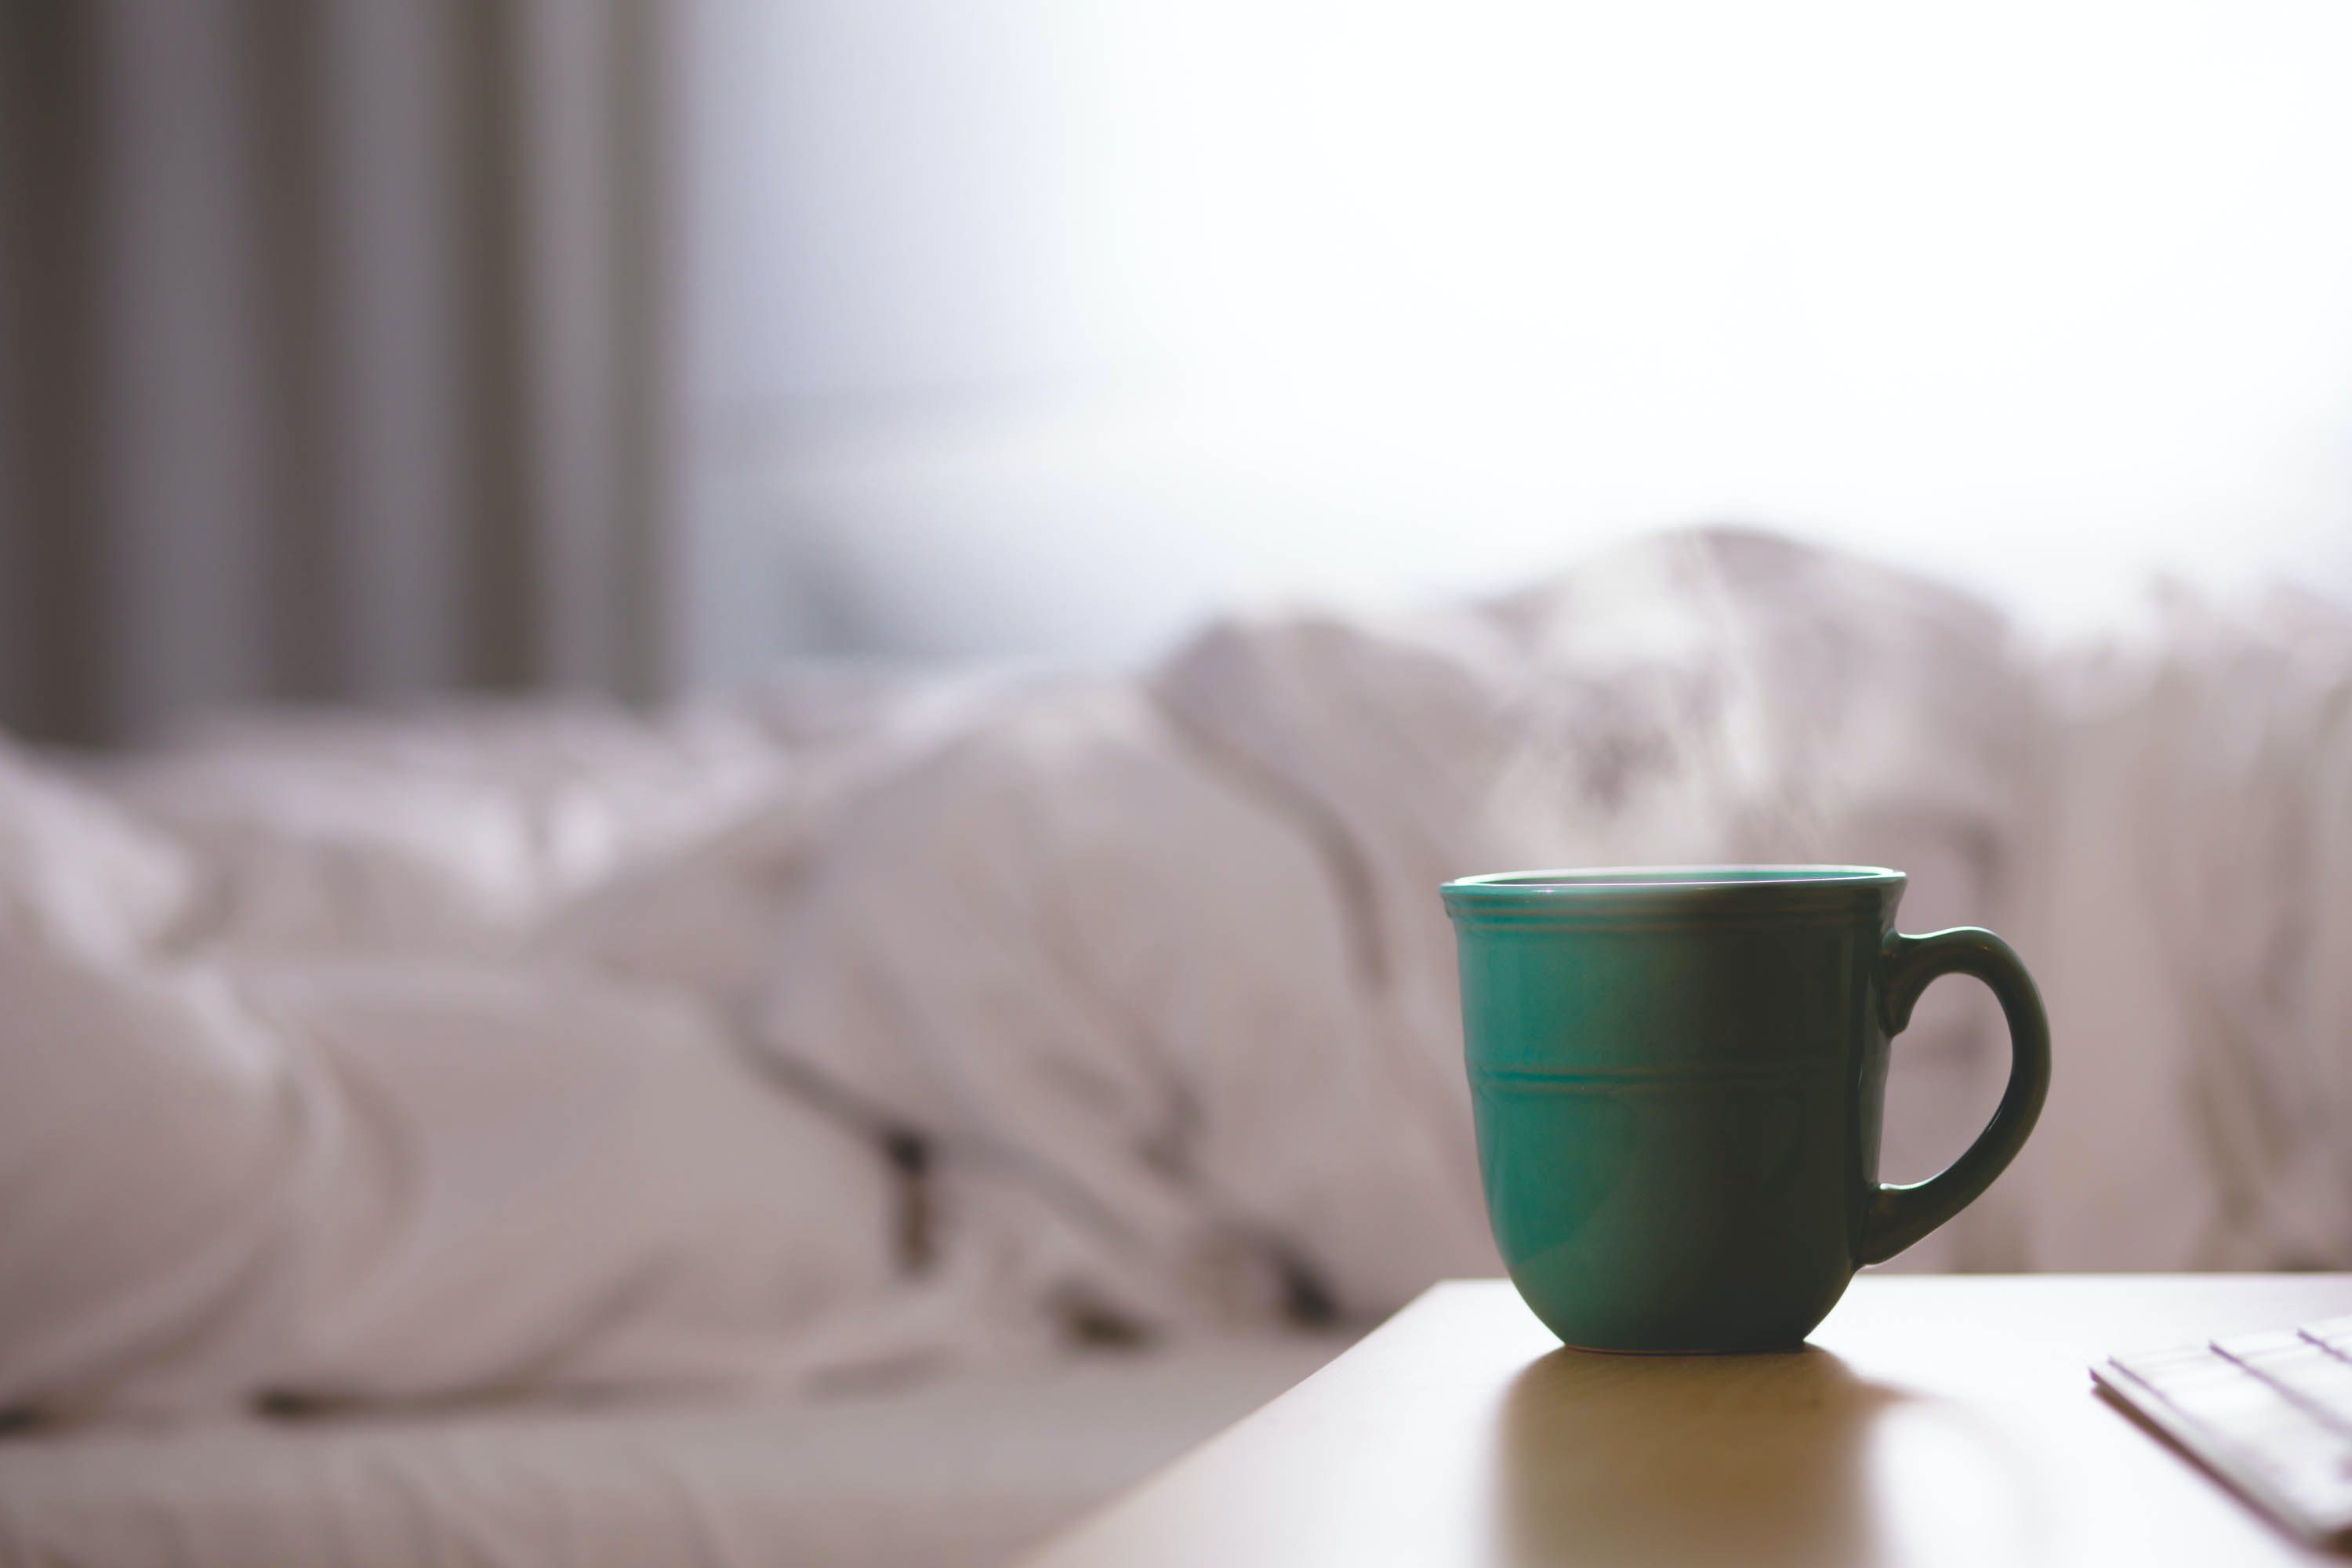 Morning Ritual: An Intentional Way To Start The Day